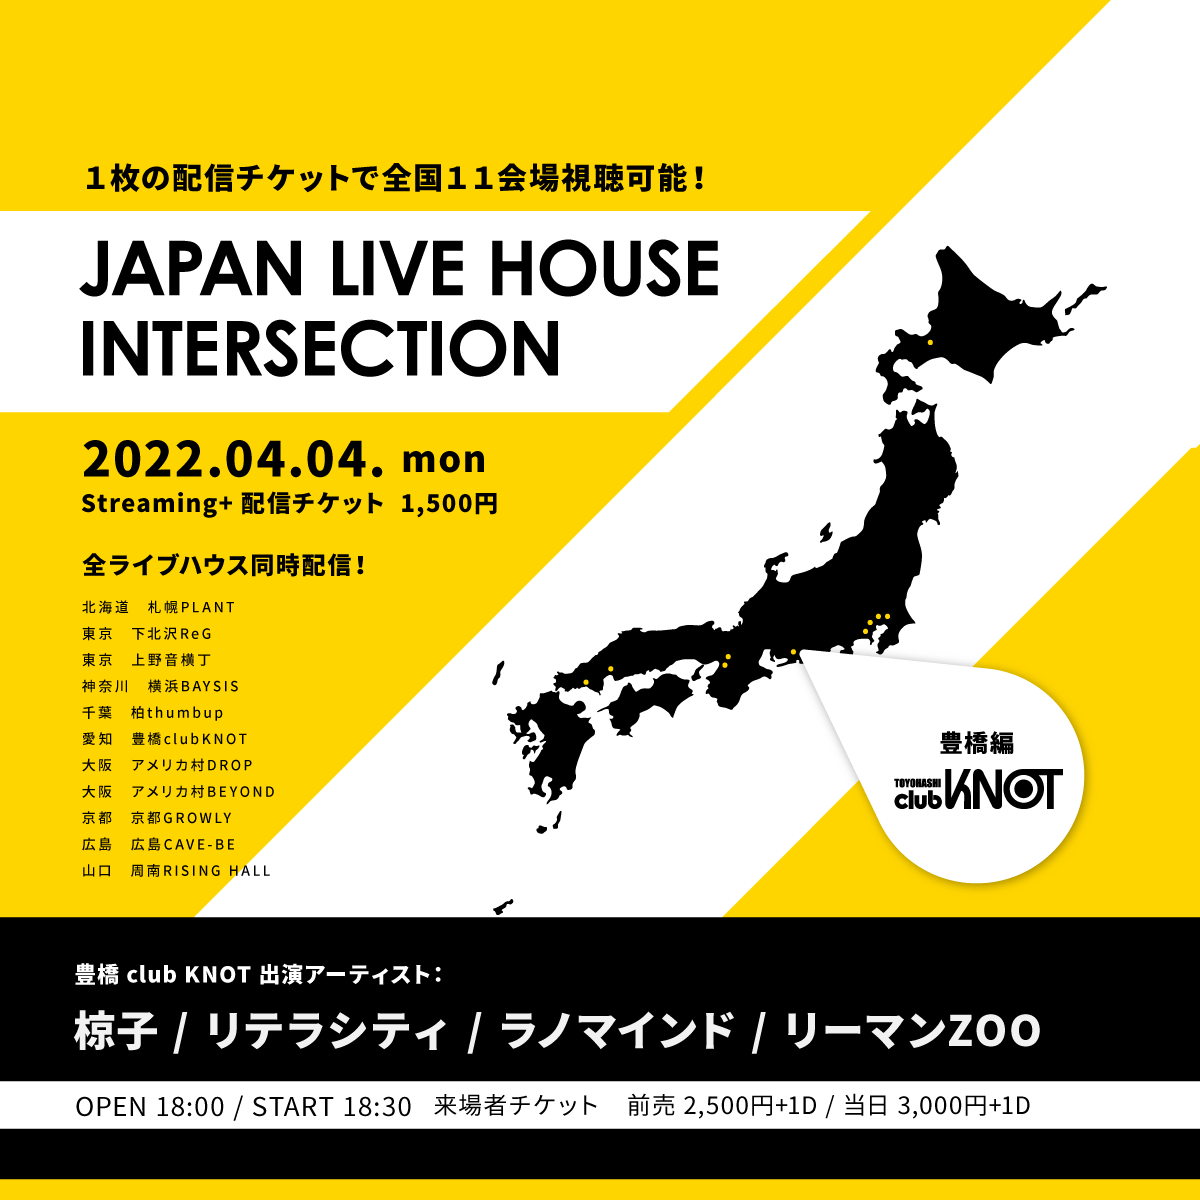 『JAPAN LIVE HOUSE INTERSECTION vol.1』～ジャパイン～